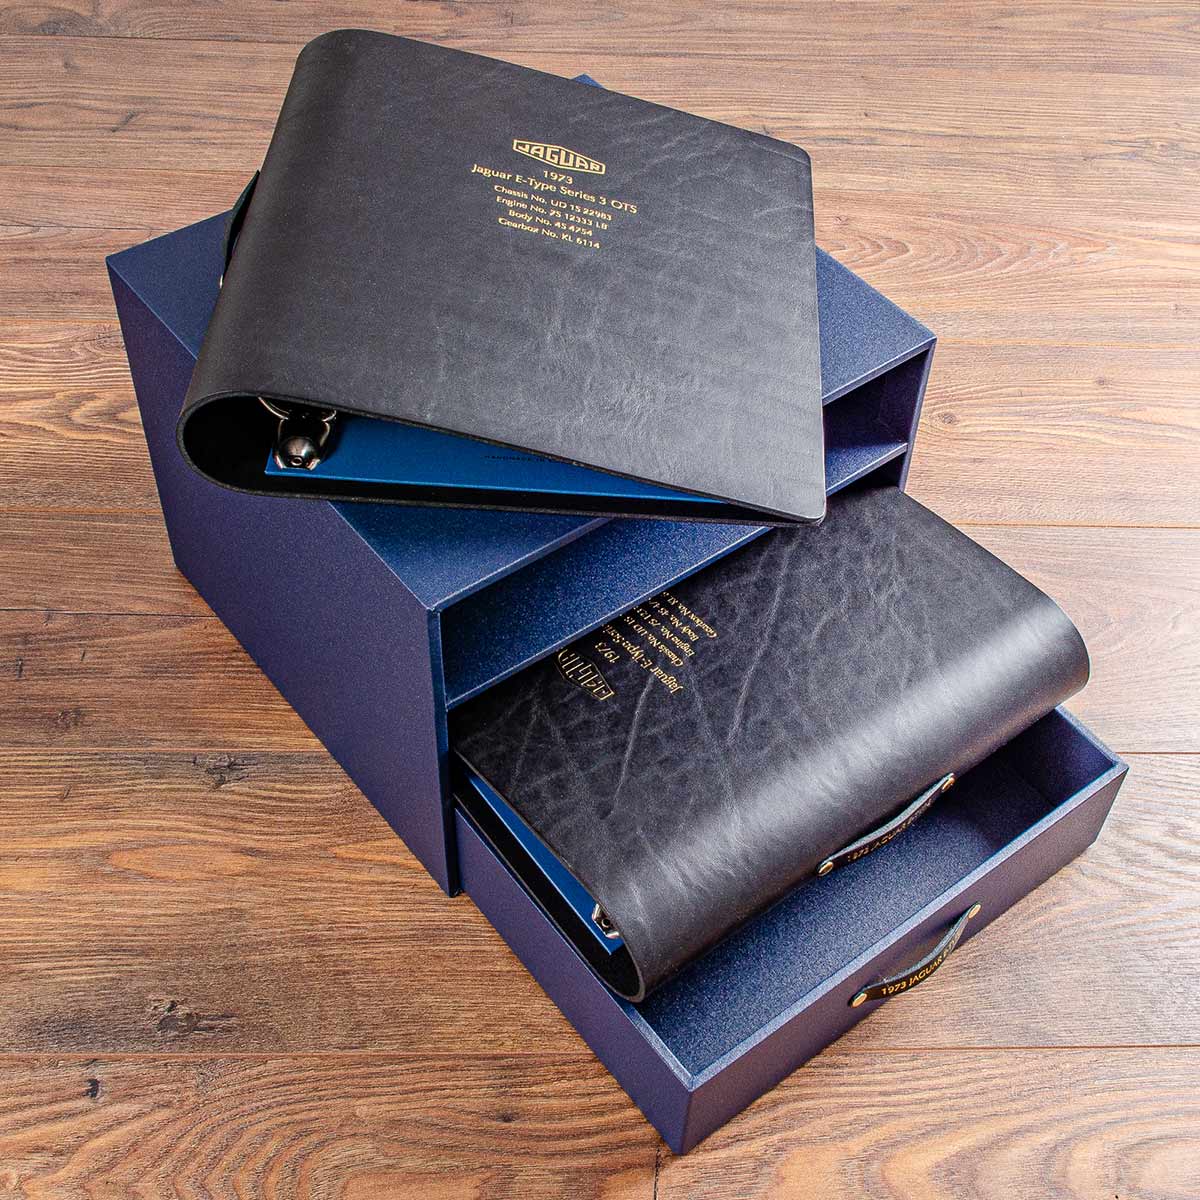 Black leather binders for vehicle documents and history